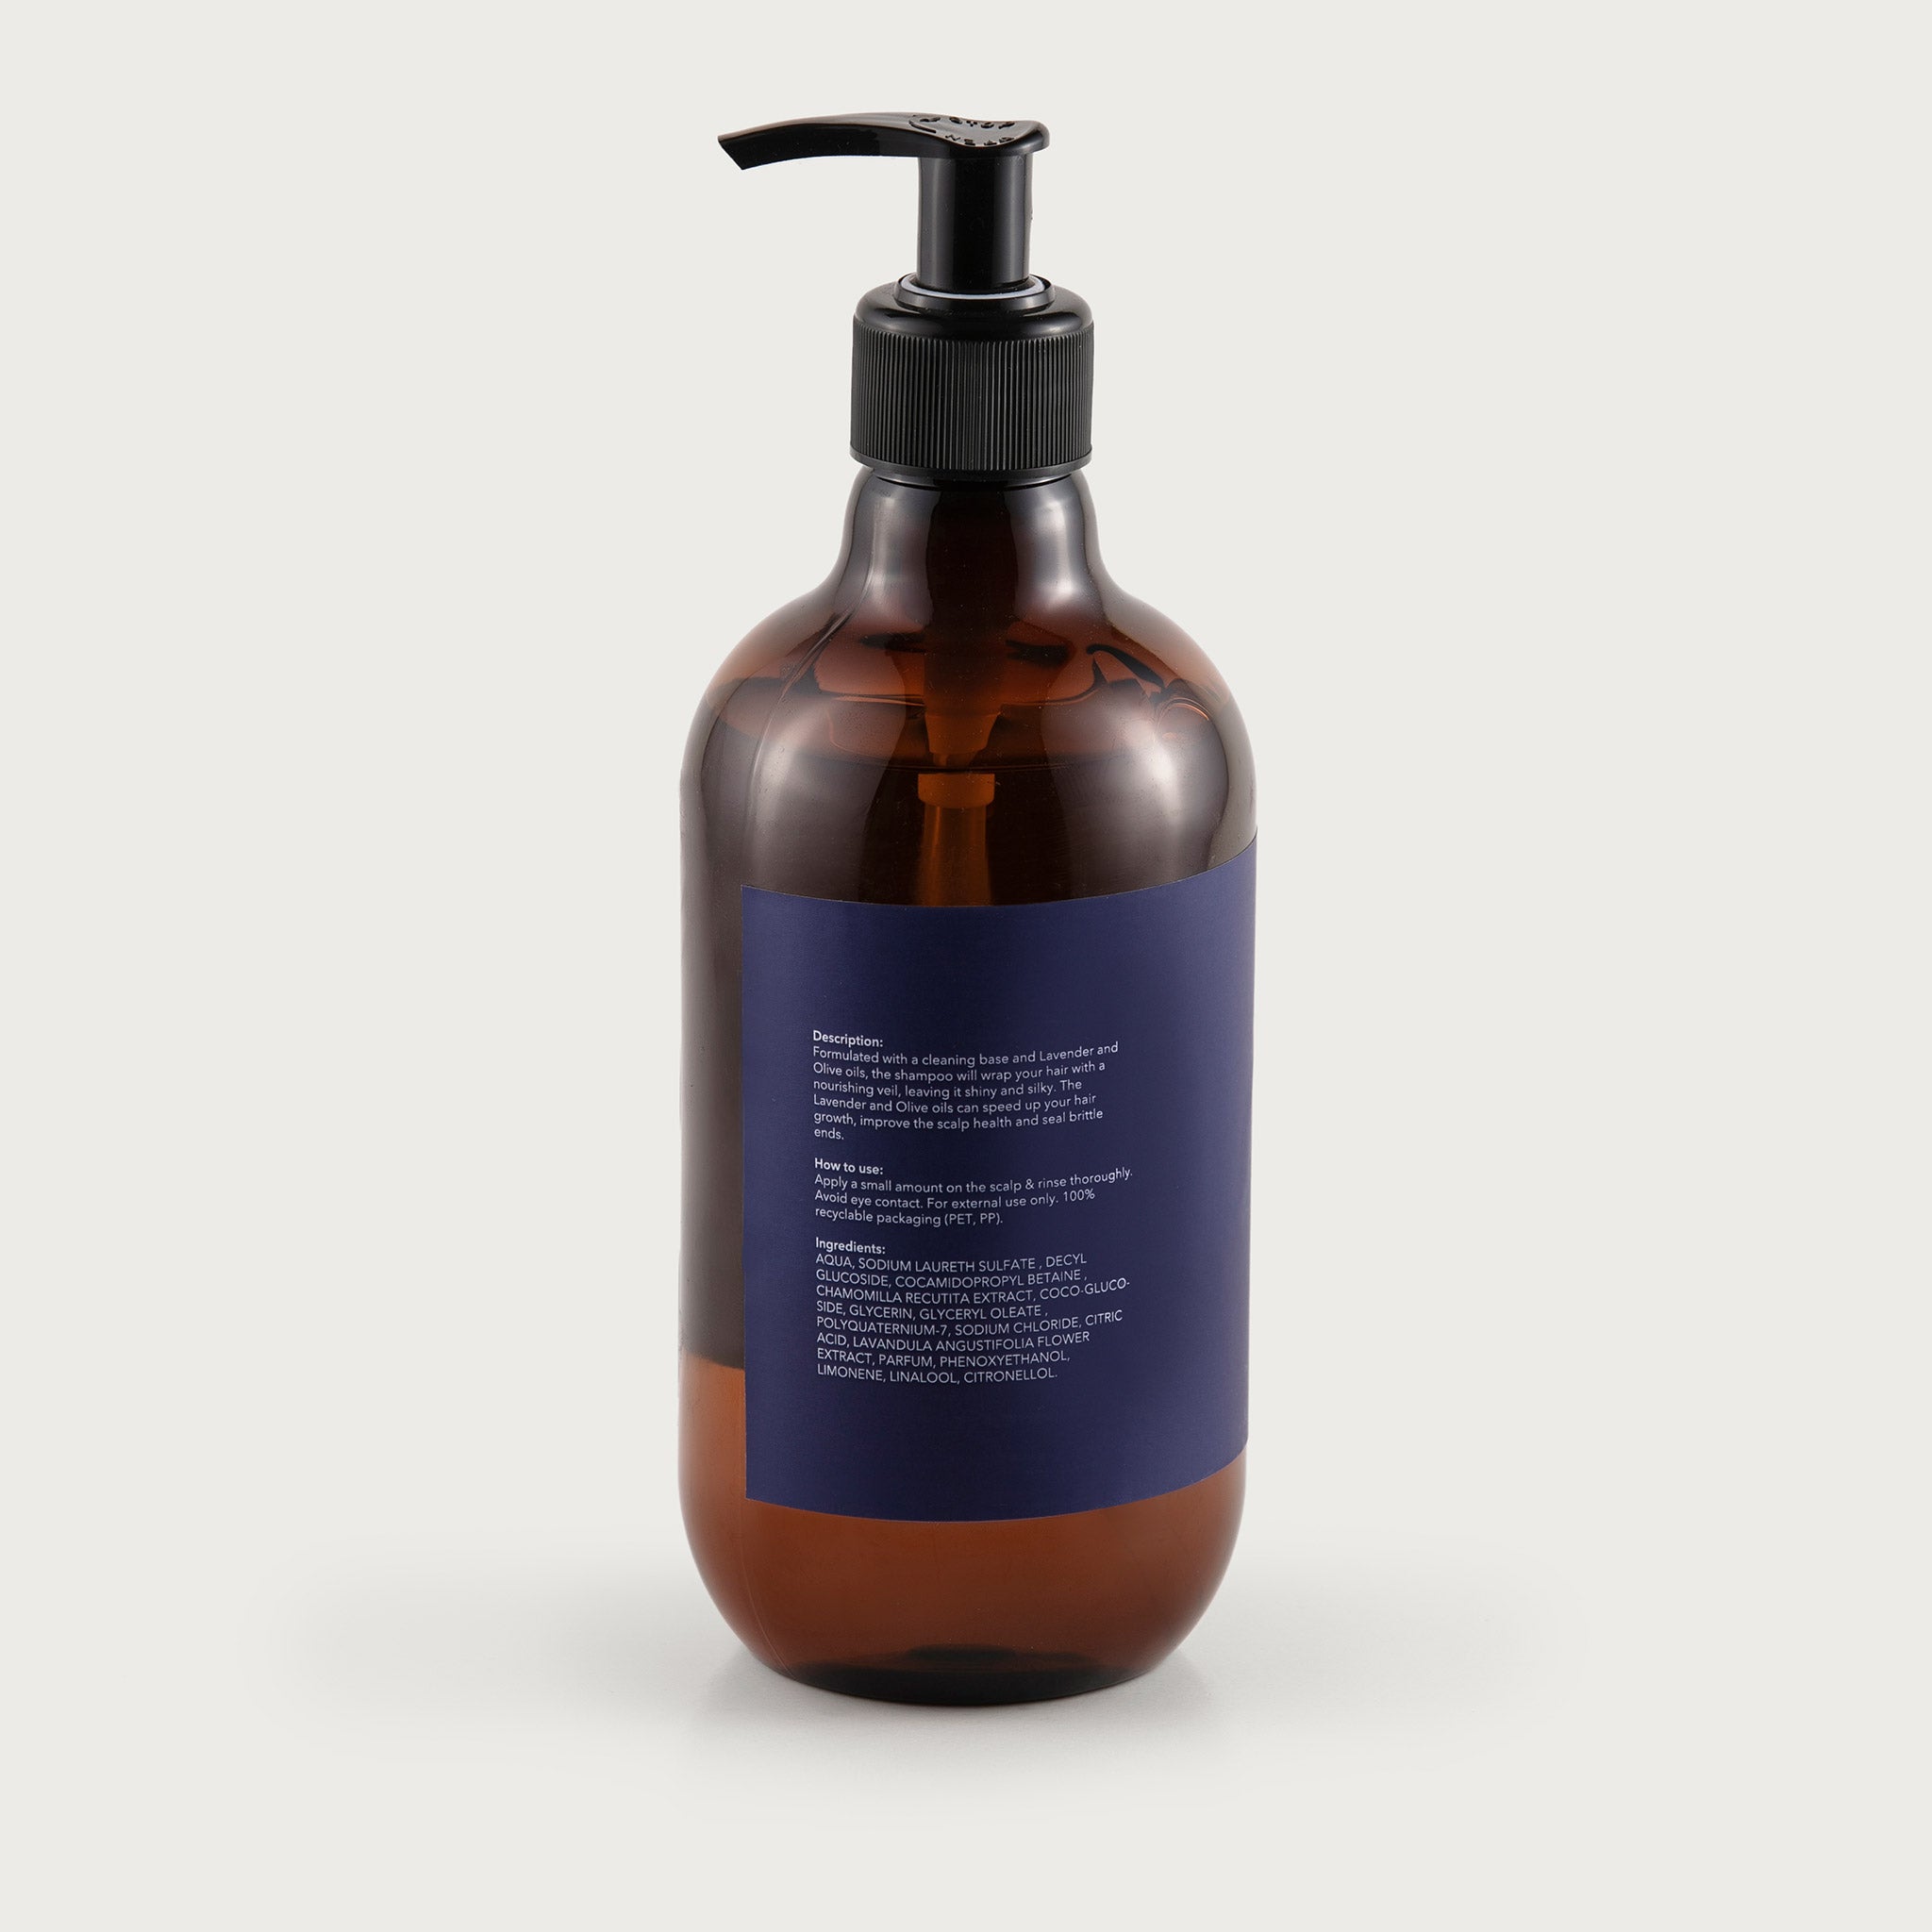 This pump top bottle is amber in color so you can see the clear shampoo inside. The label is deep purple and features the Salma logo and the lavender & olive oil scent notated.